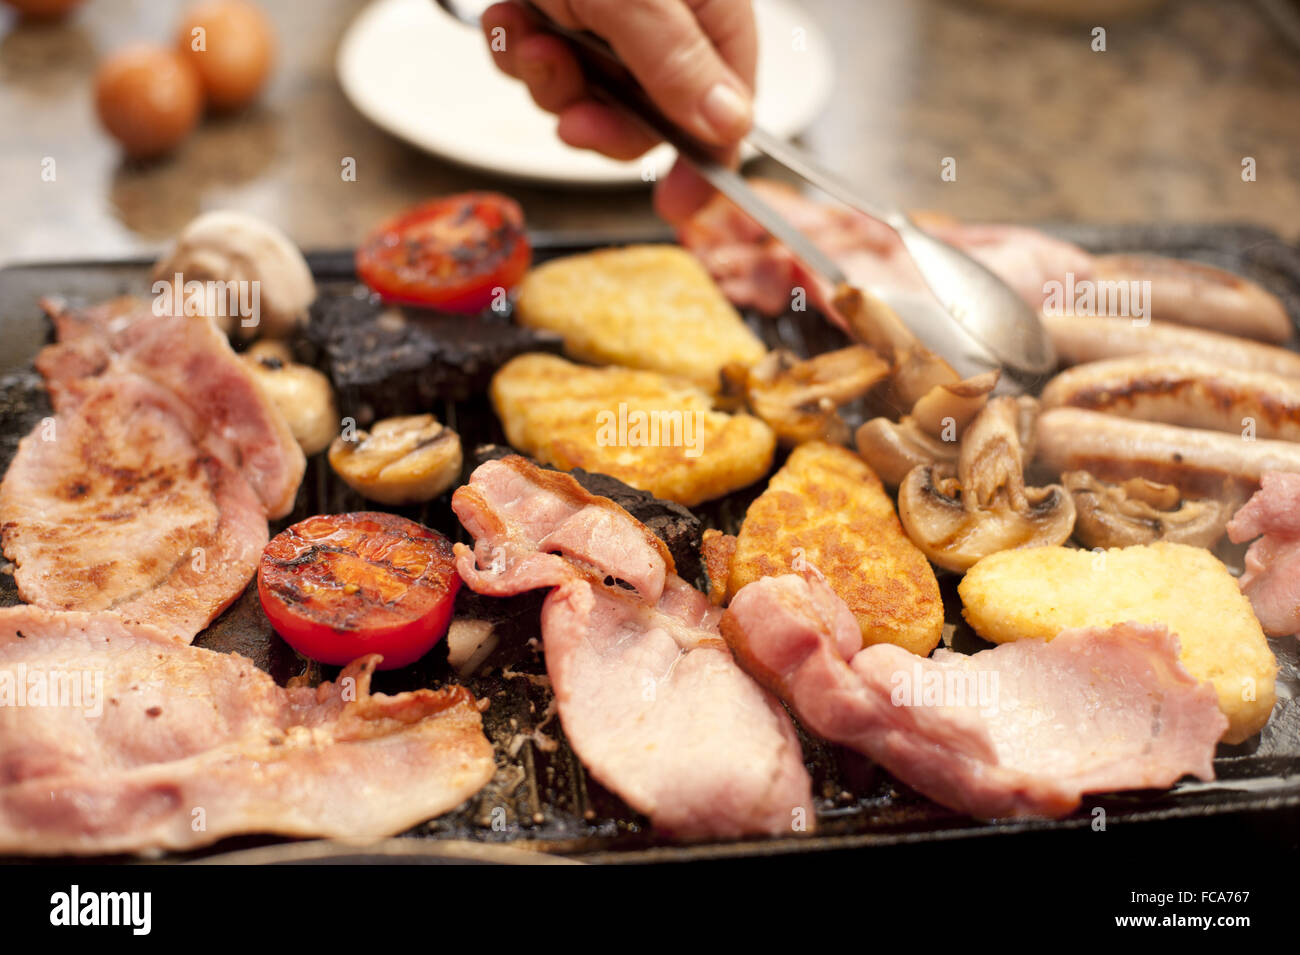 Man serving a hearty cooked breakfast Stock Photo